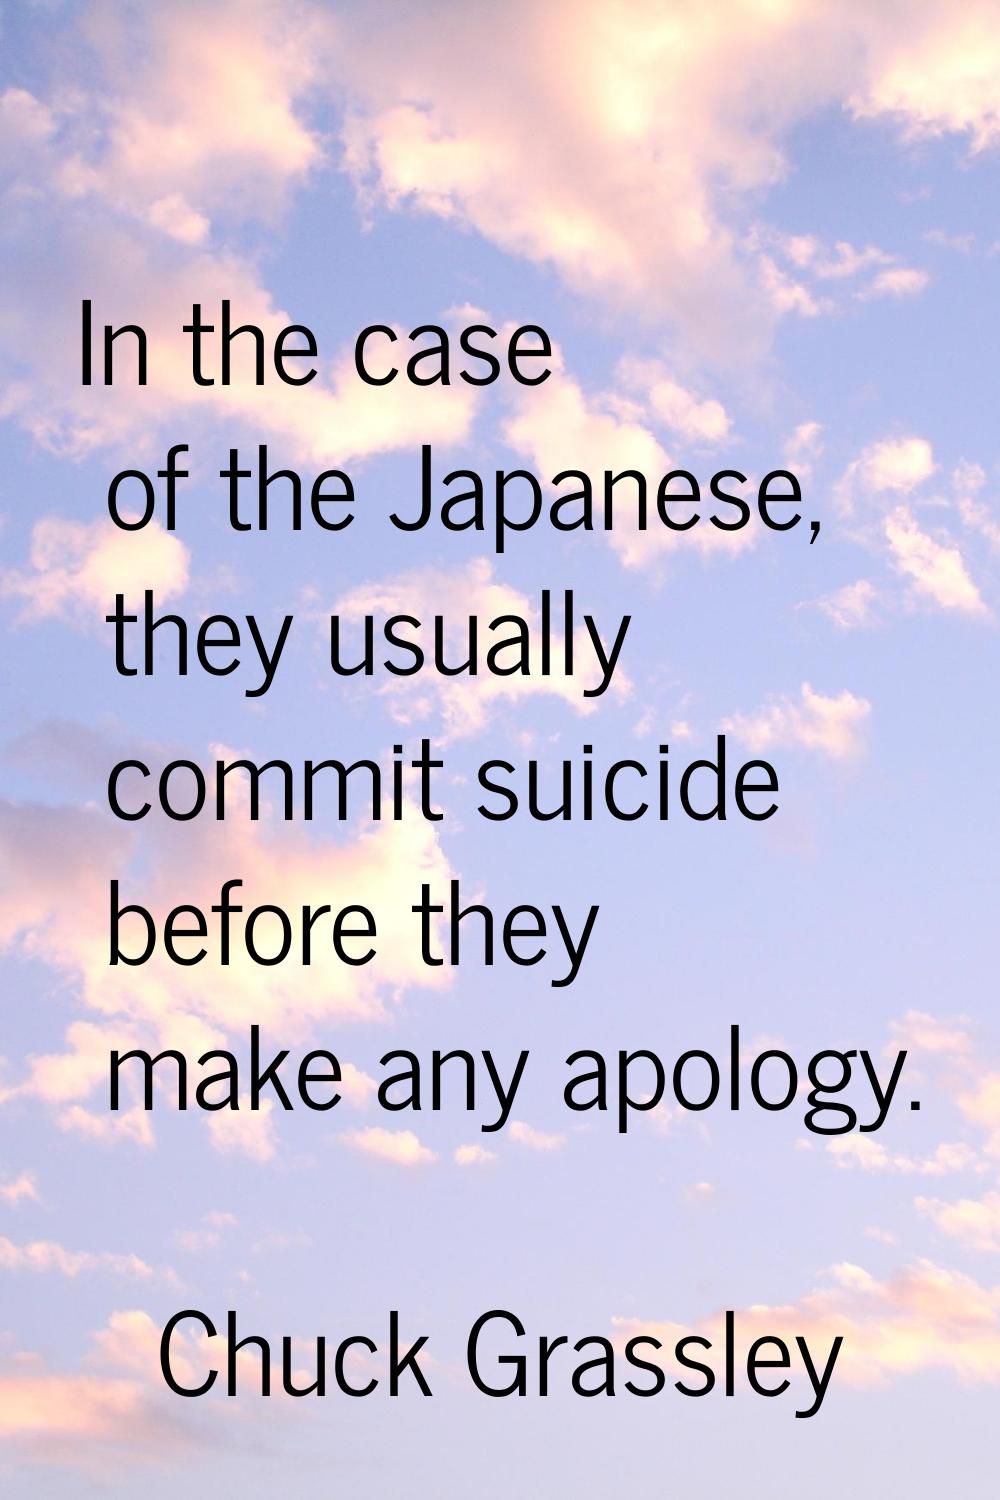 In the case of the Japanese, they usually commit suicide before they make any apology.